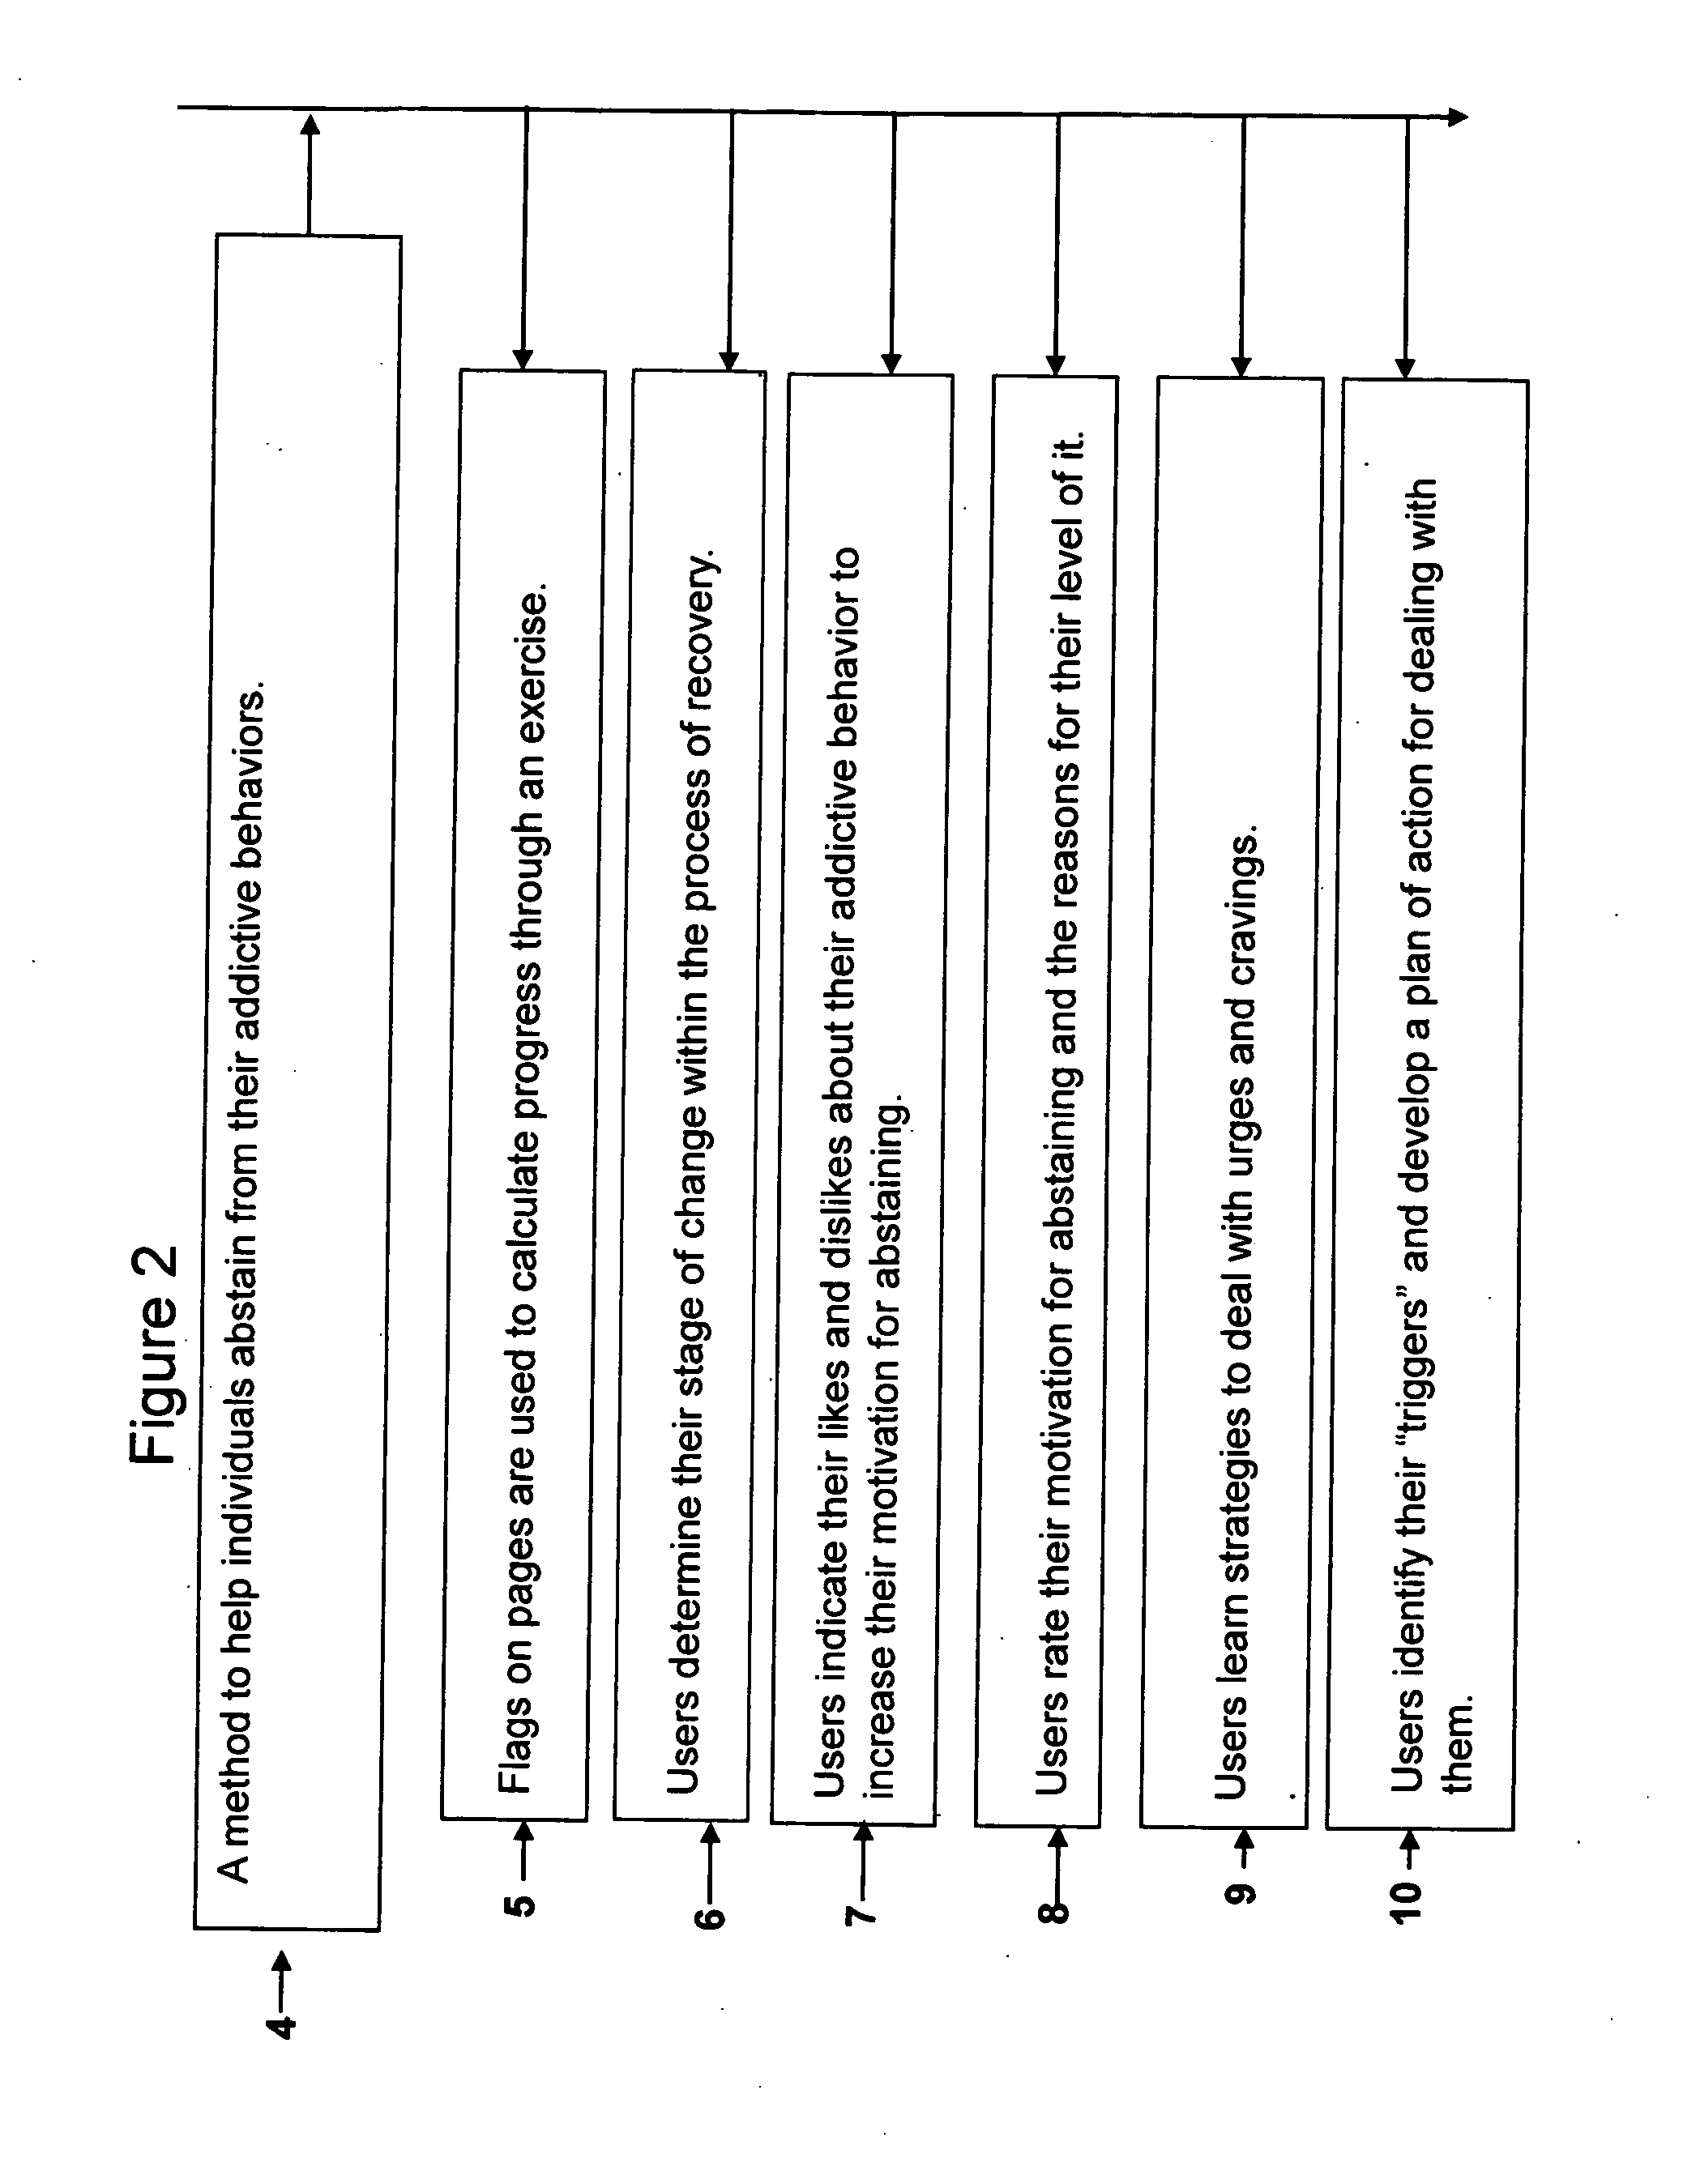 System and method for recovering form addictions